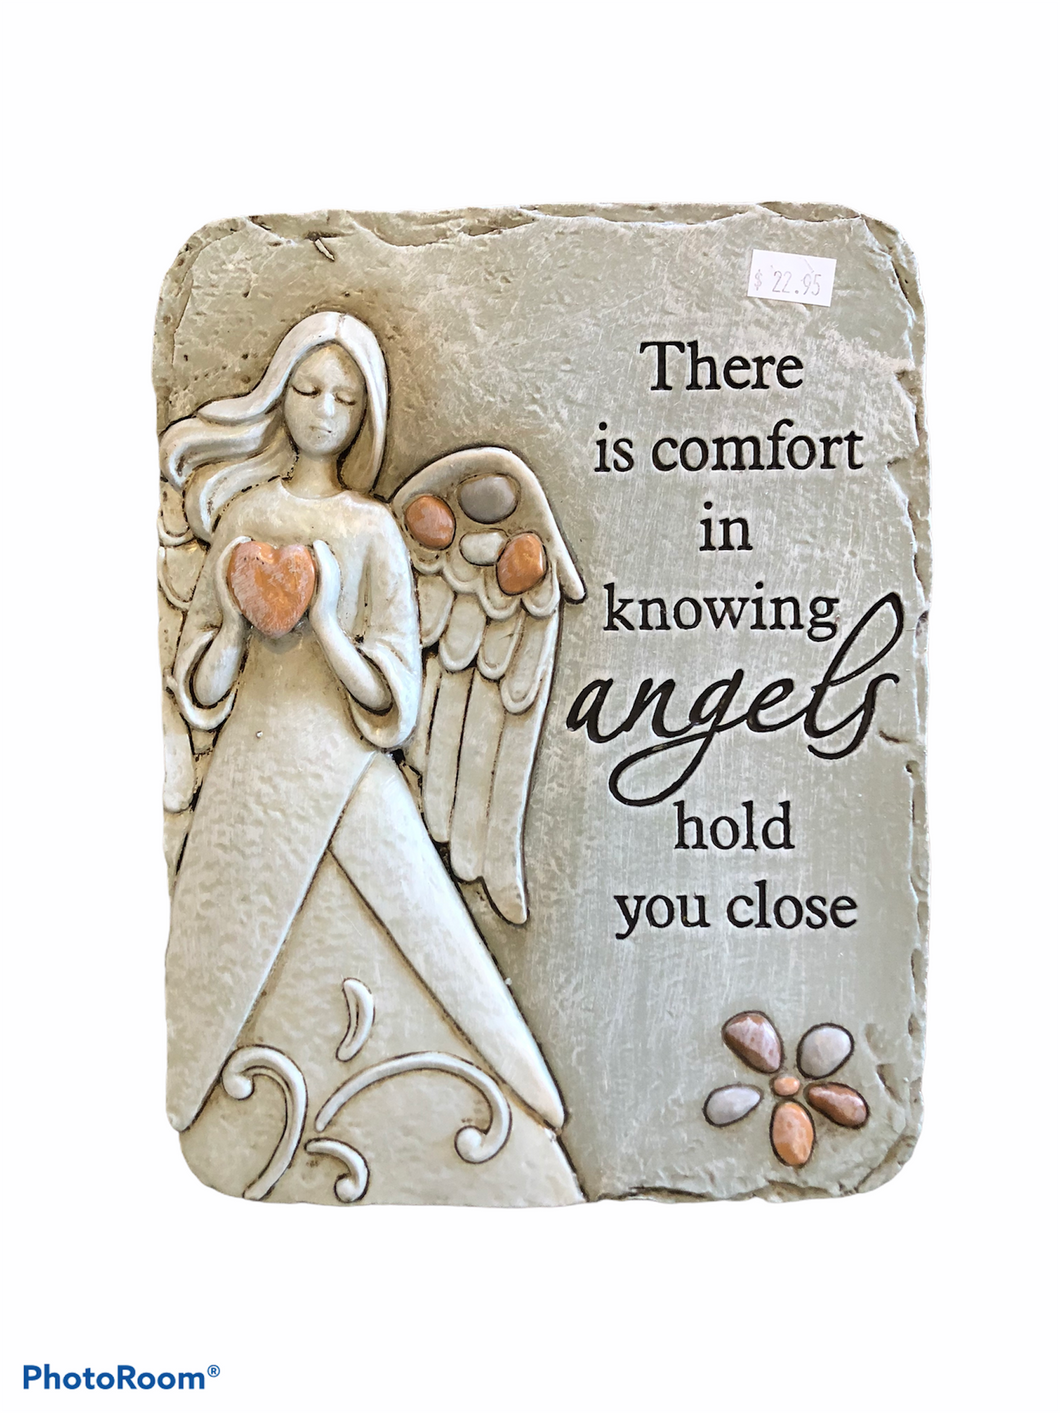 Angel stone plaque - There is comfort in knowing